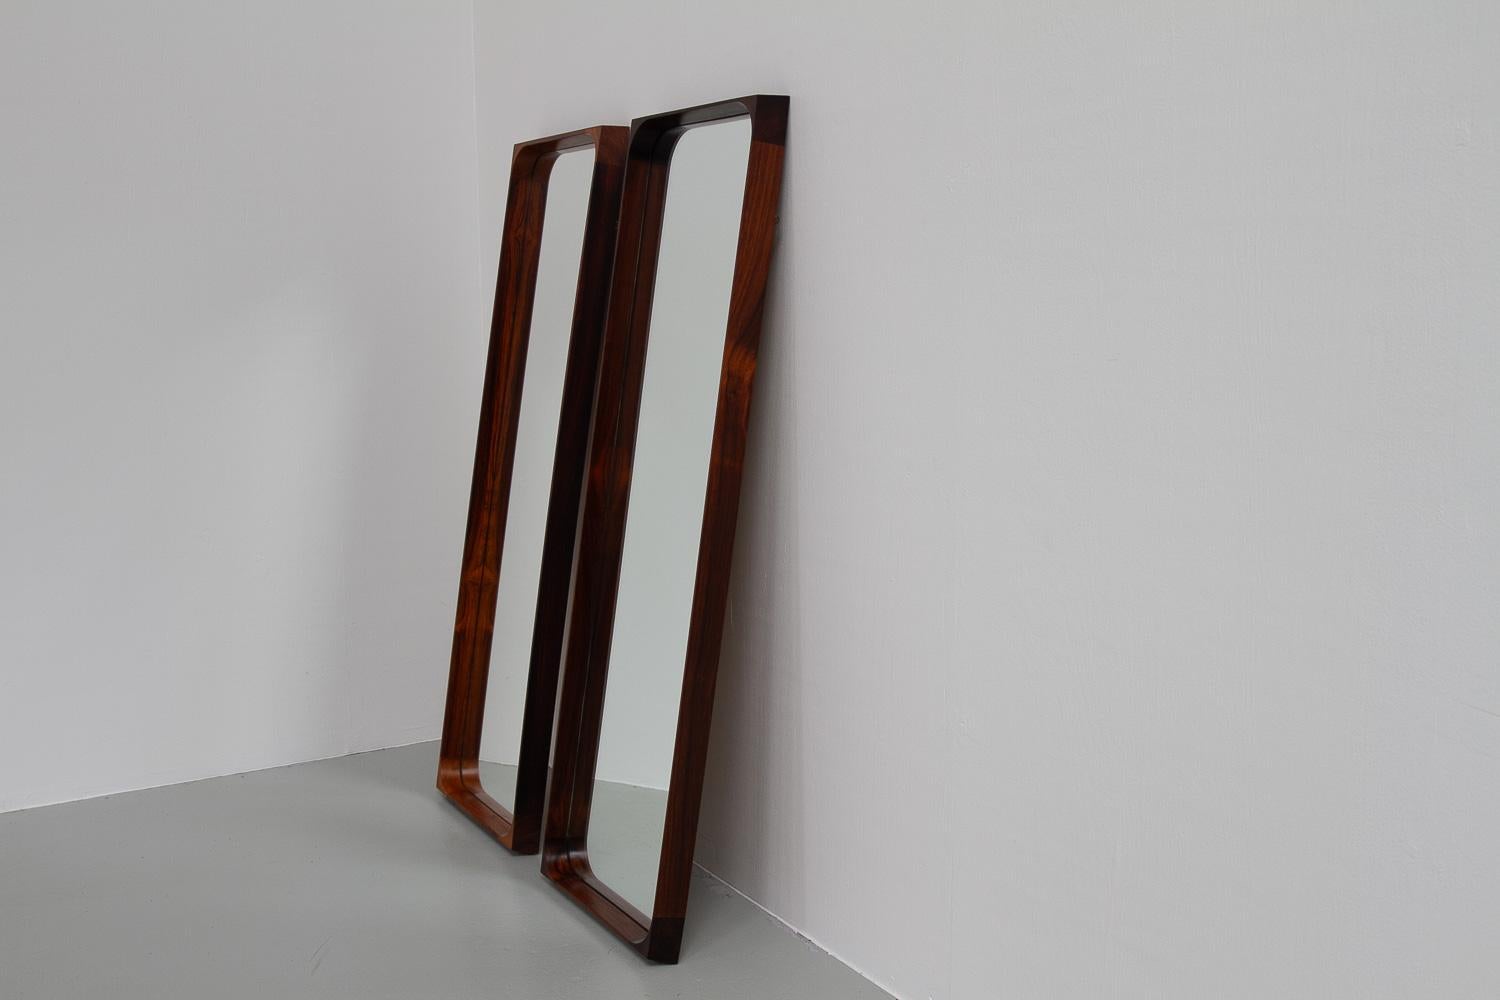 Scandinavian Modern Danish Modern Rosewood Mirrors by Niels Clausen for NC Møbler, 1960s. Set of 2. For Sale